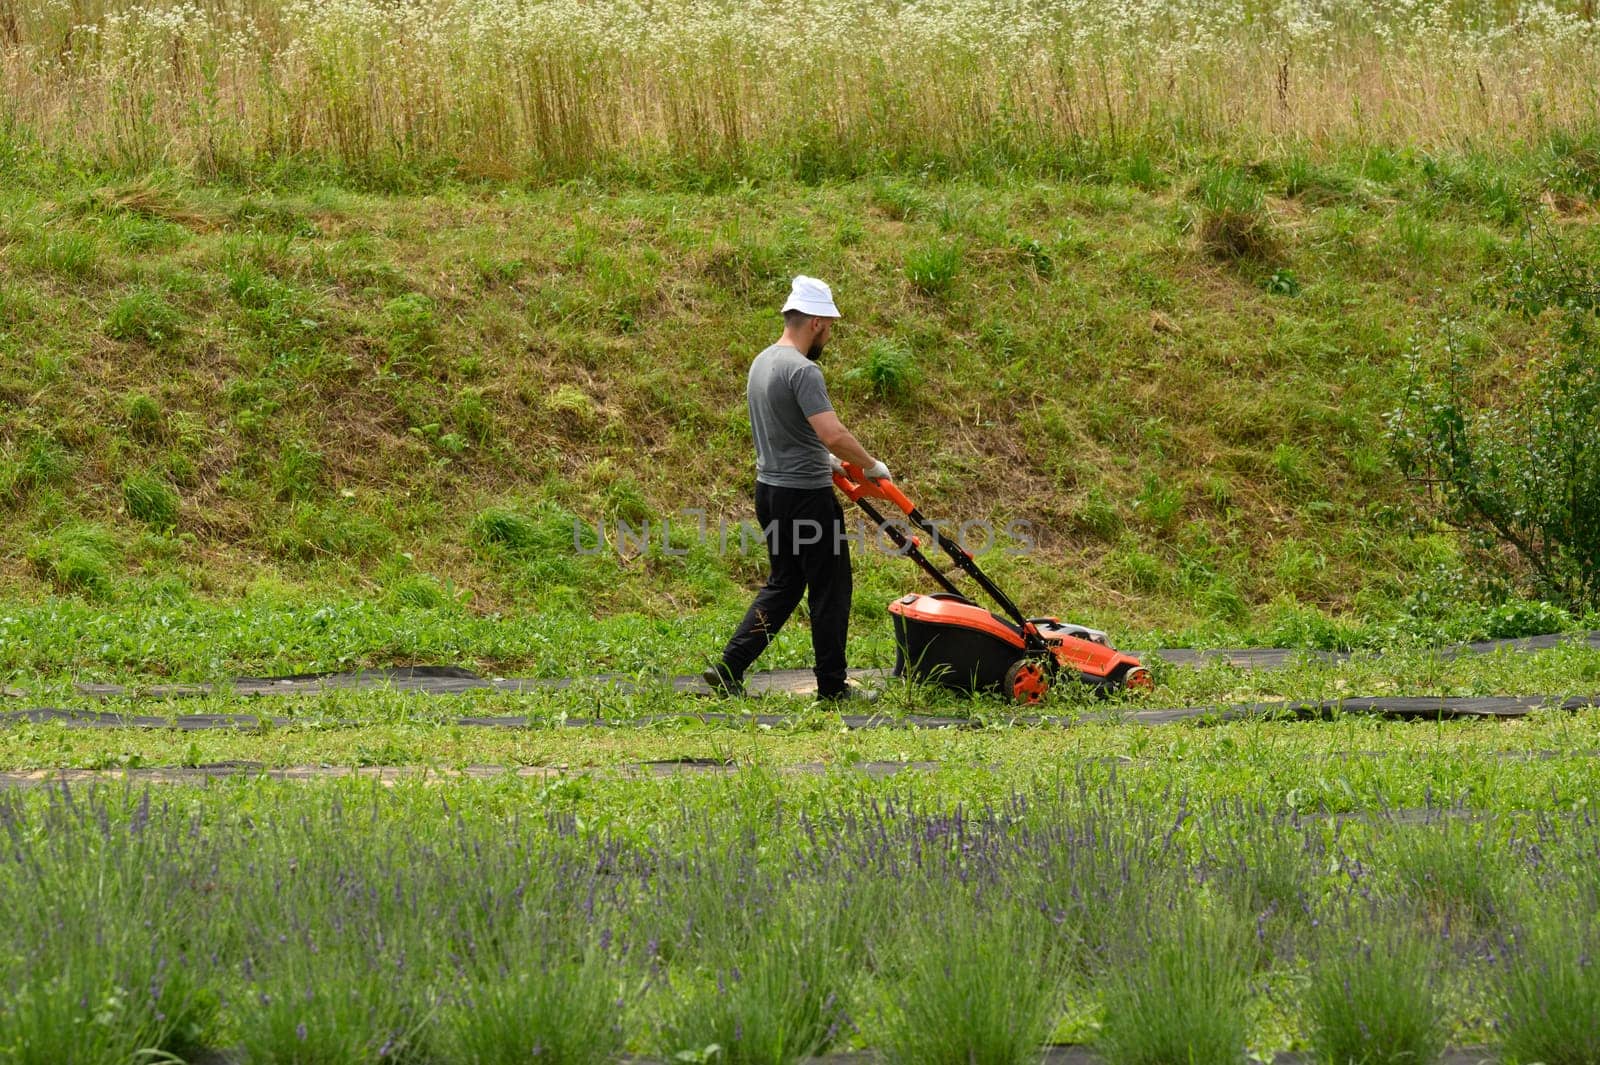 Lavender field and gardener mowing the grass and tending the lavender field, lawnmower and garden work.